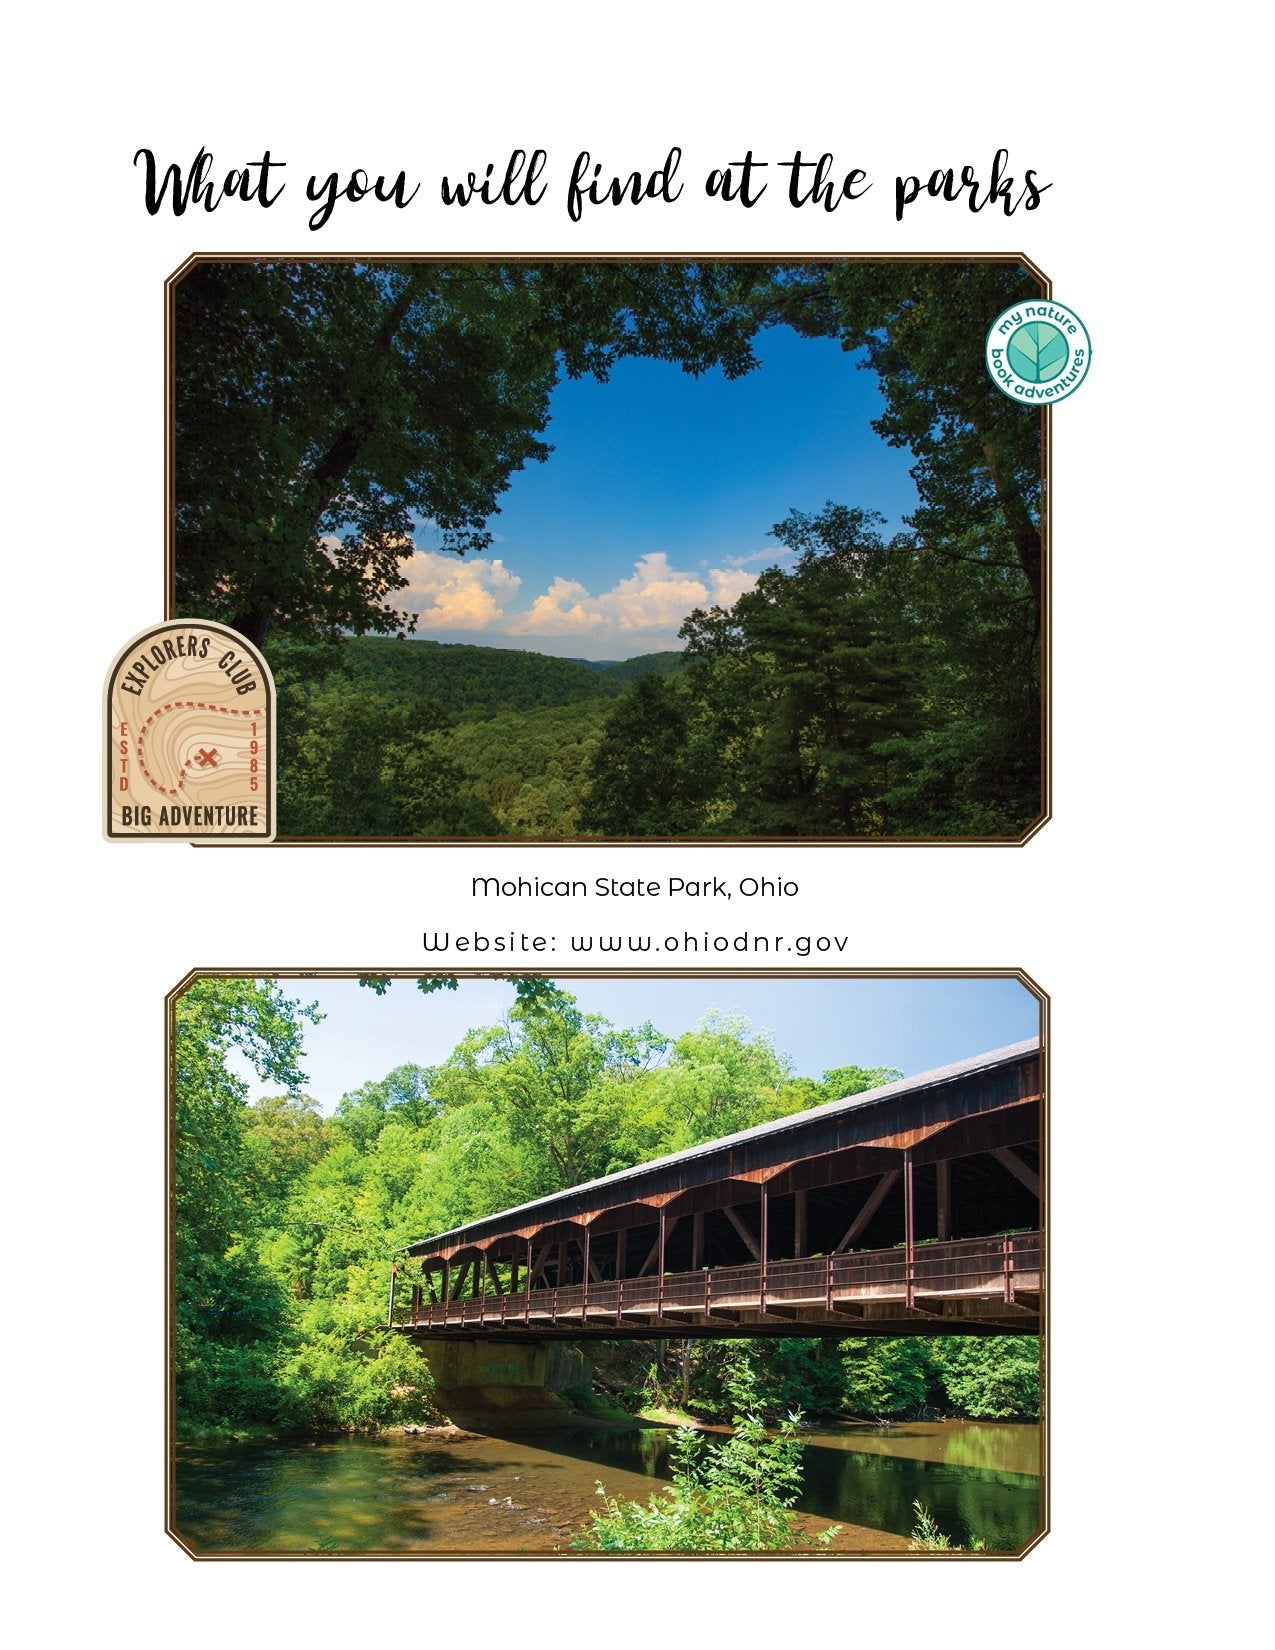 Ohio State Parks - Adventure Planning Journal - My Nature Book Adventures